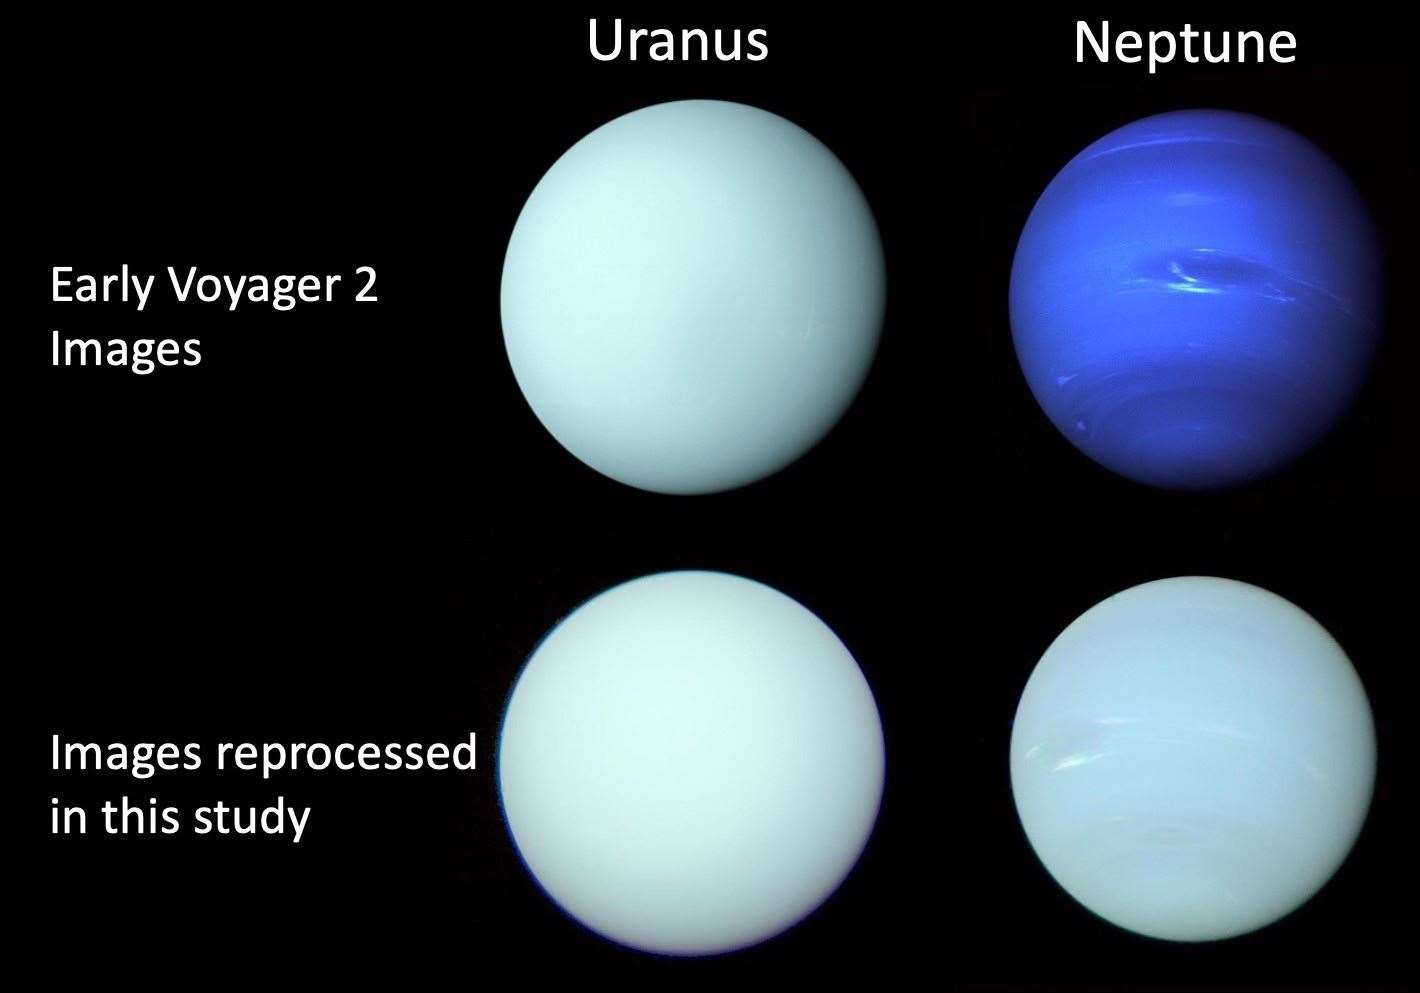 A new study has revealed that Neptune and Uranus are actually much closer in colour than typically thought (Patrick Irwin/University of Oxford/Nasa/JPL-Caltech)